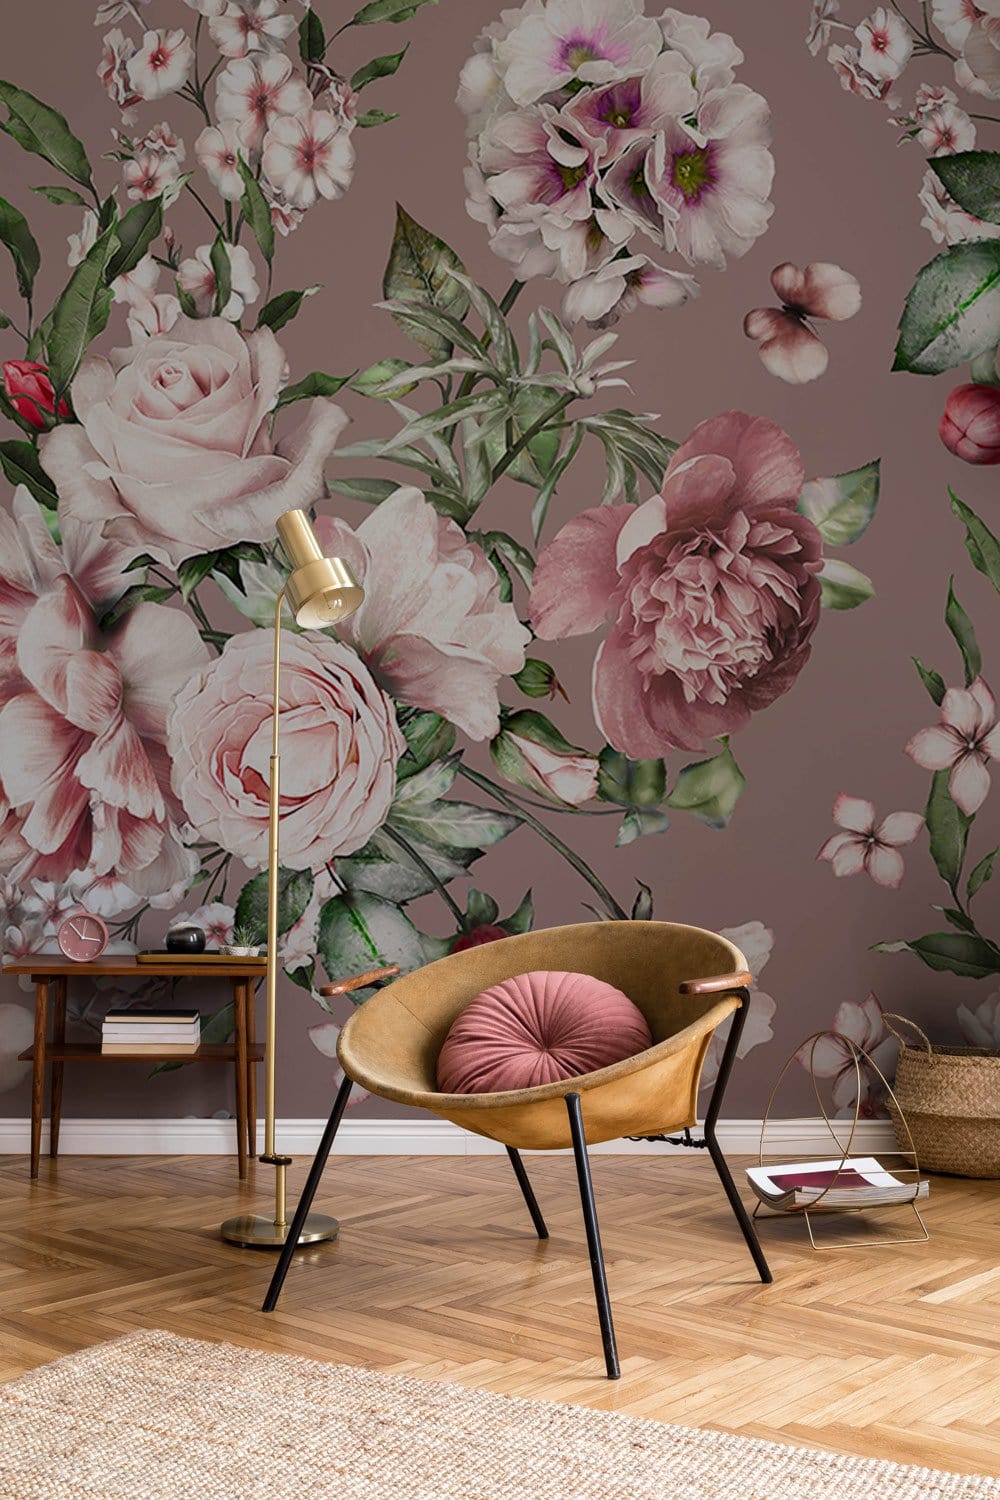 Wallpaper Mural with Pink Flower Bush for Hallway Decorations